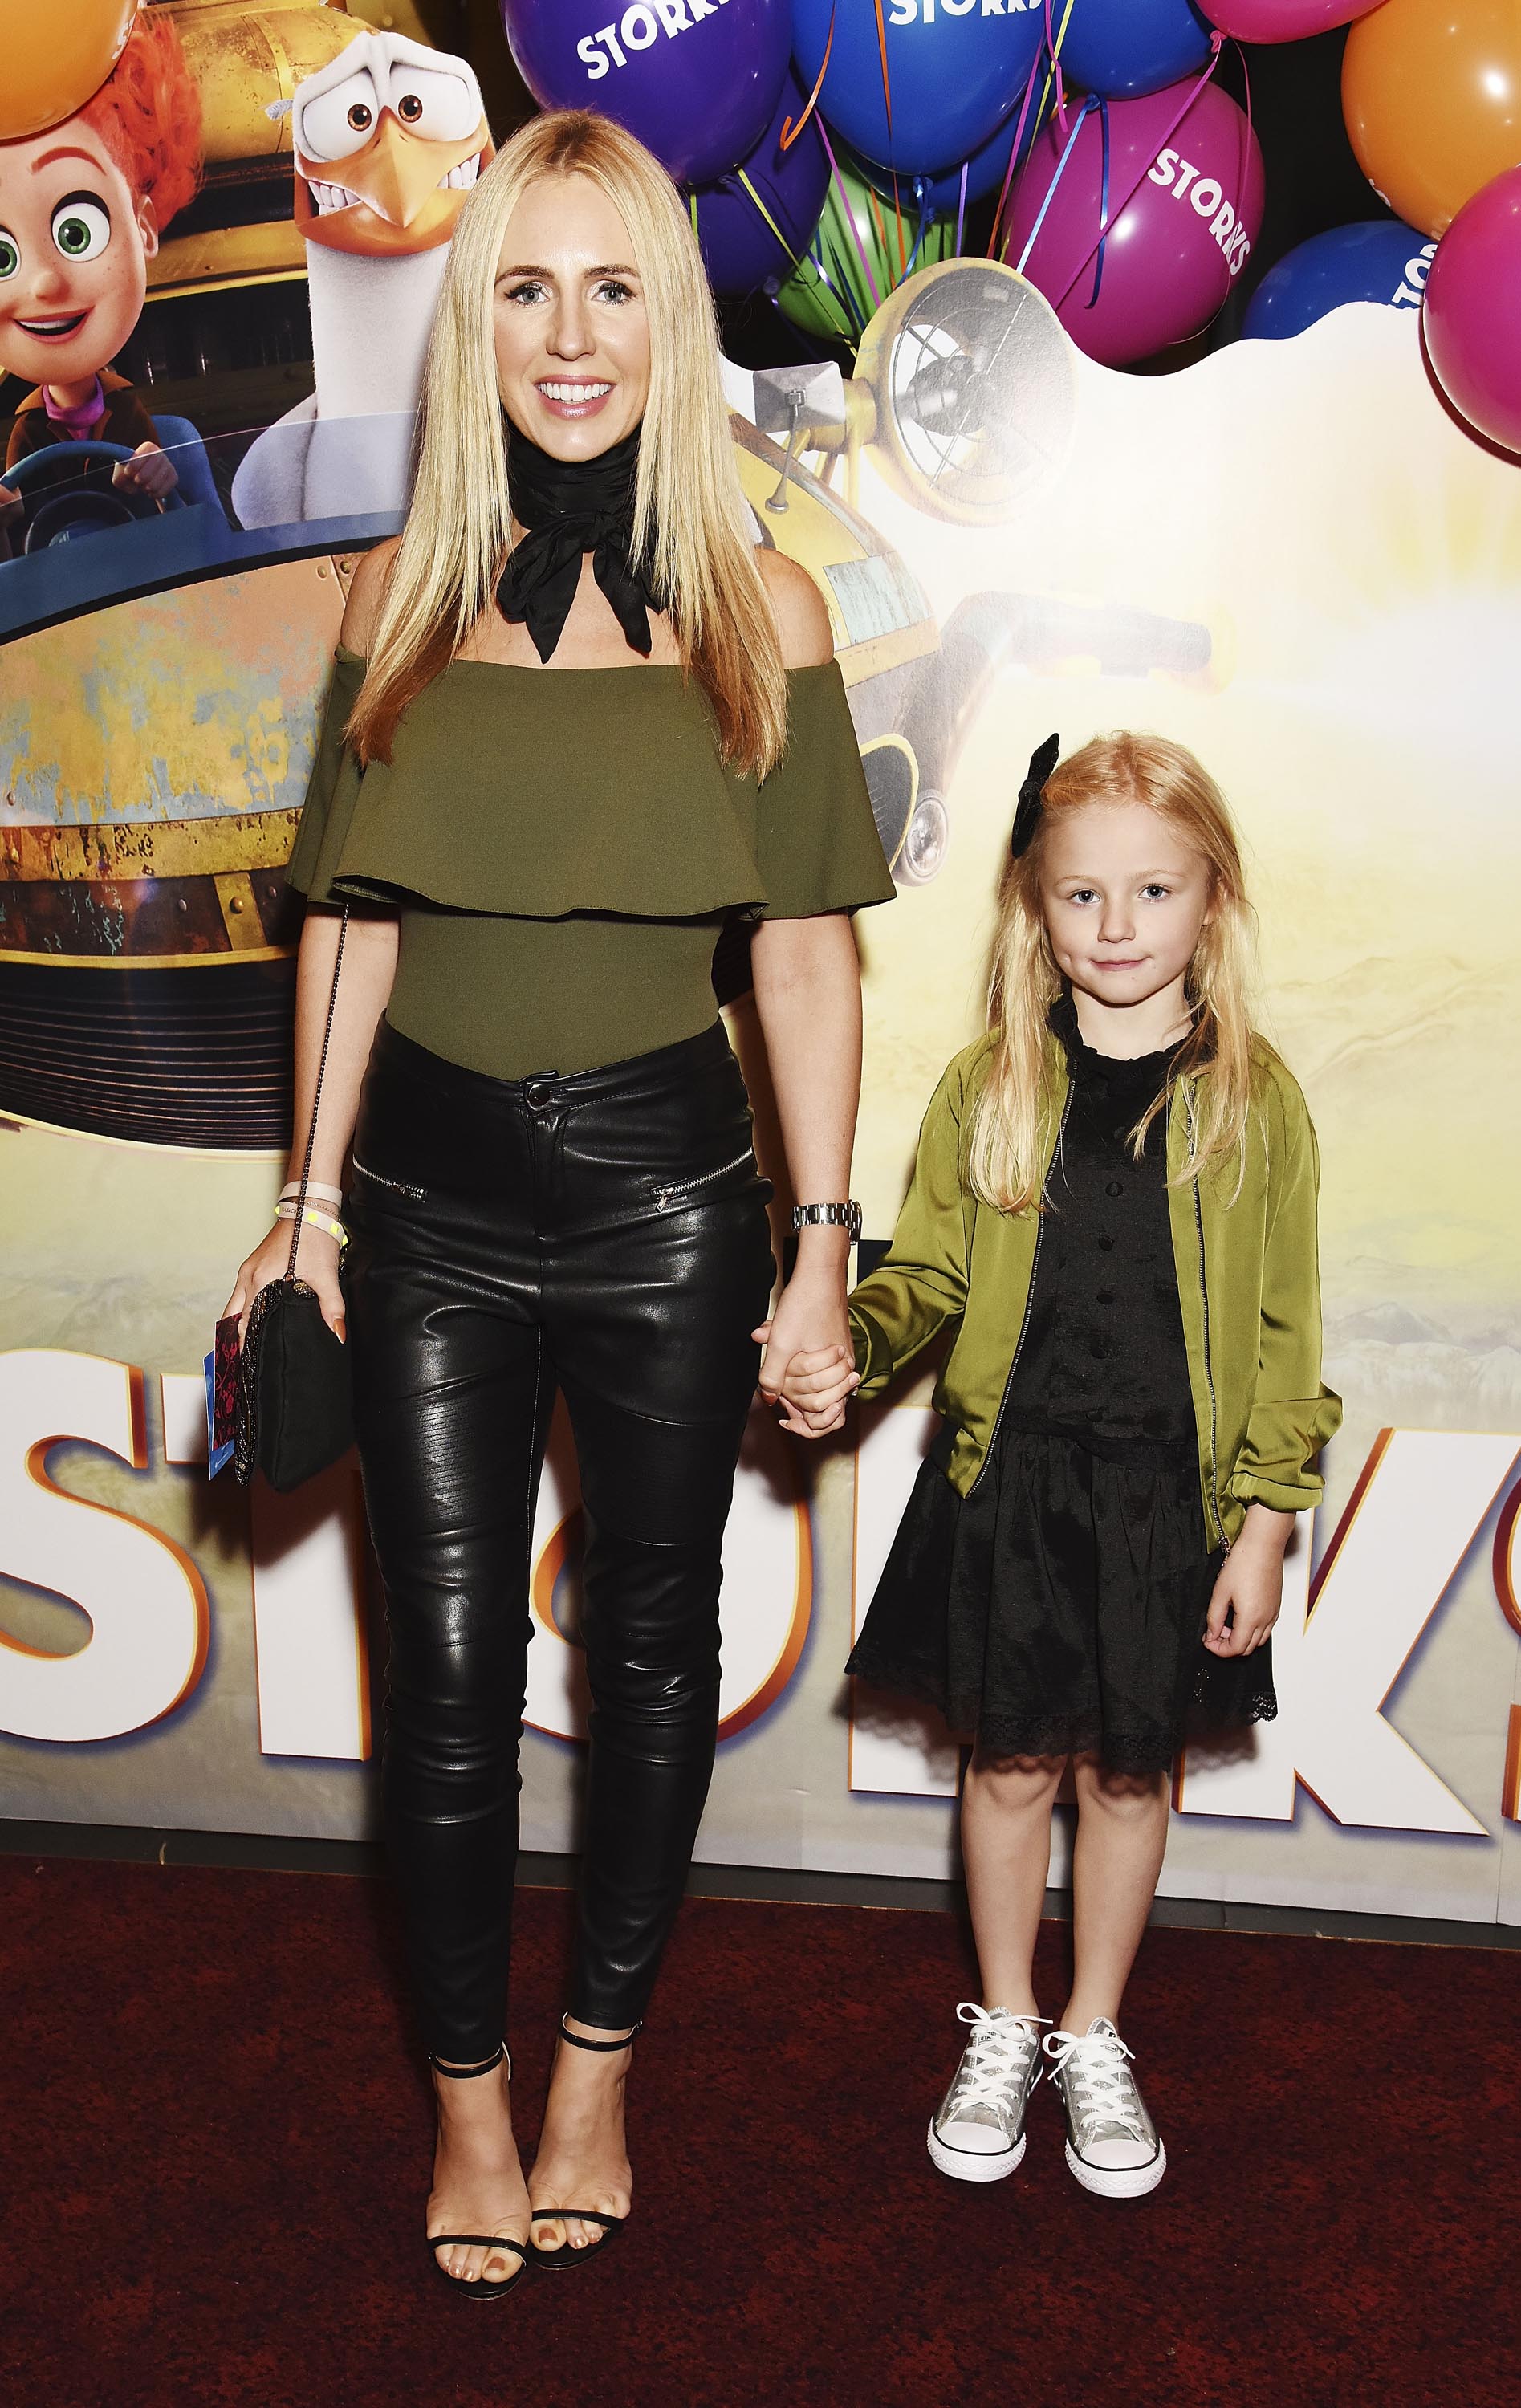 Naomi Isted attends a multimedia screening of Storks